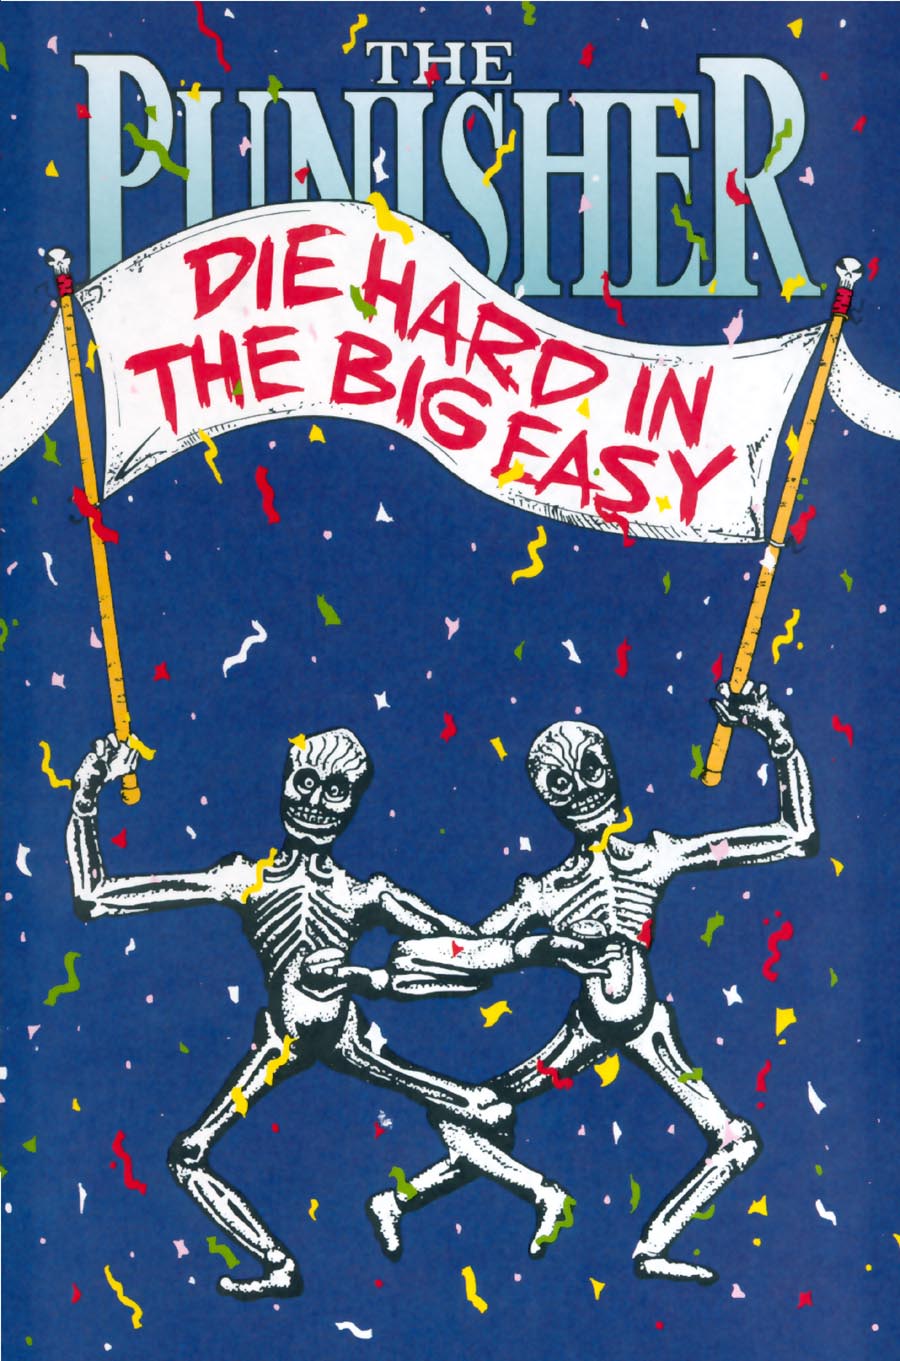 Read online Punisher: Die Hard in the Big Easy comic -  Issue # Full - 3